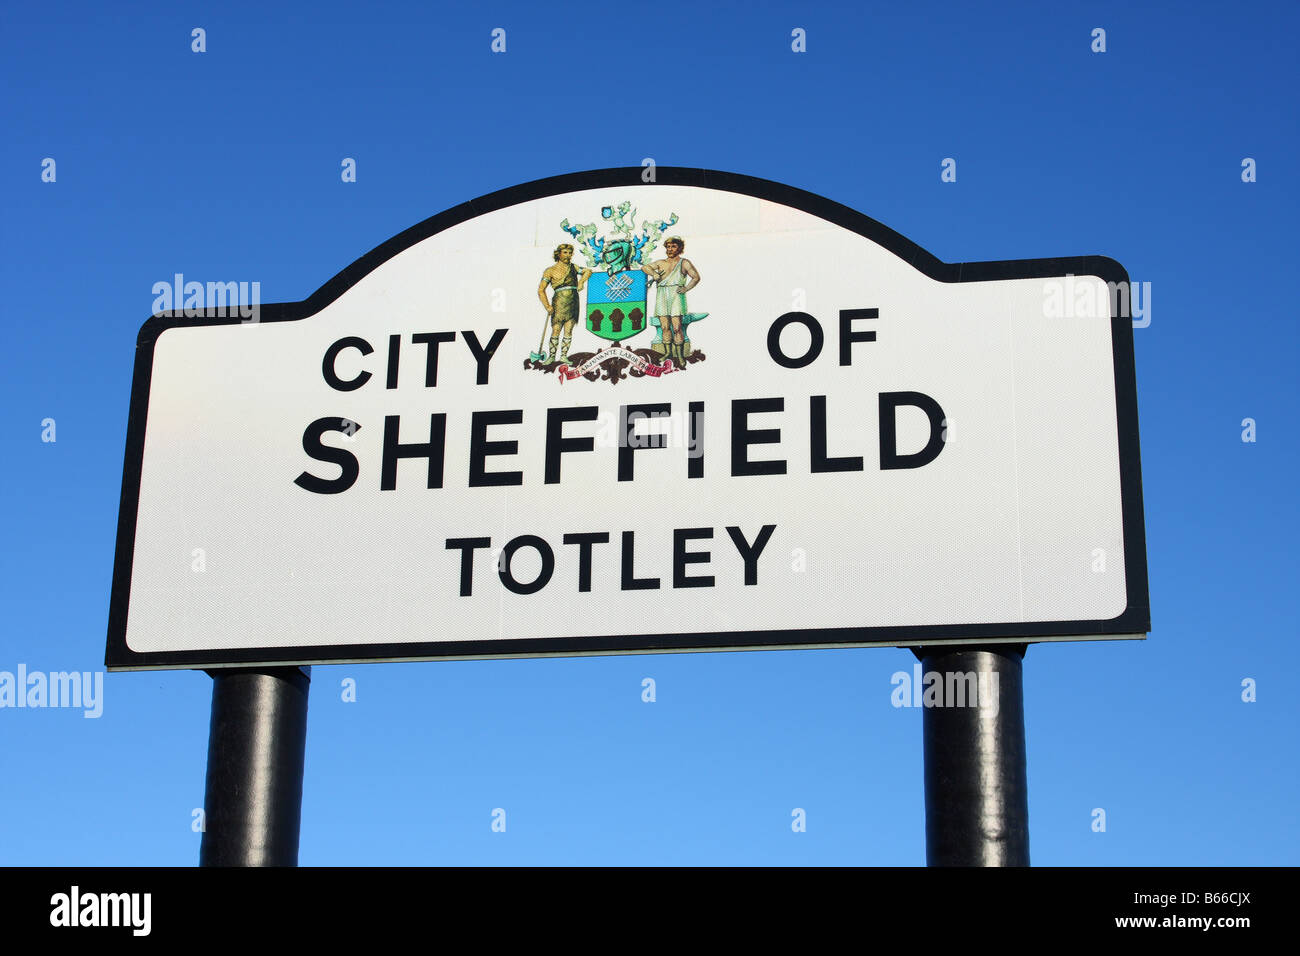 A City of Sheffield roadside sign in the suburb of Totley, Sheffield, South Yorkshire, England, U.K. Stock Photo